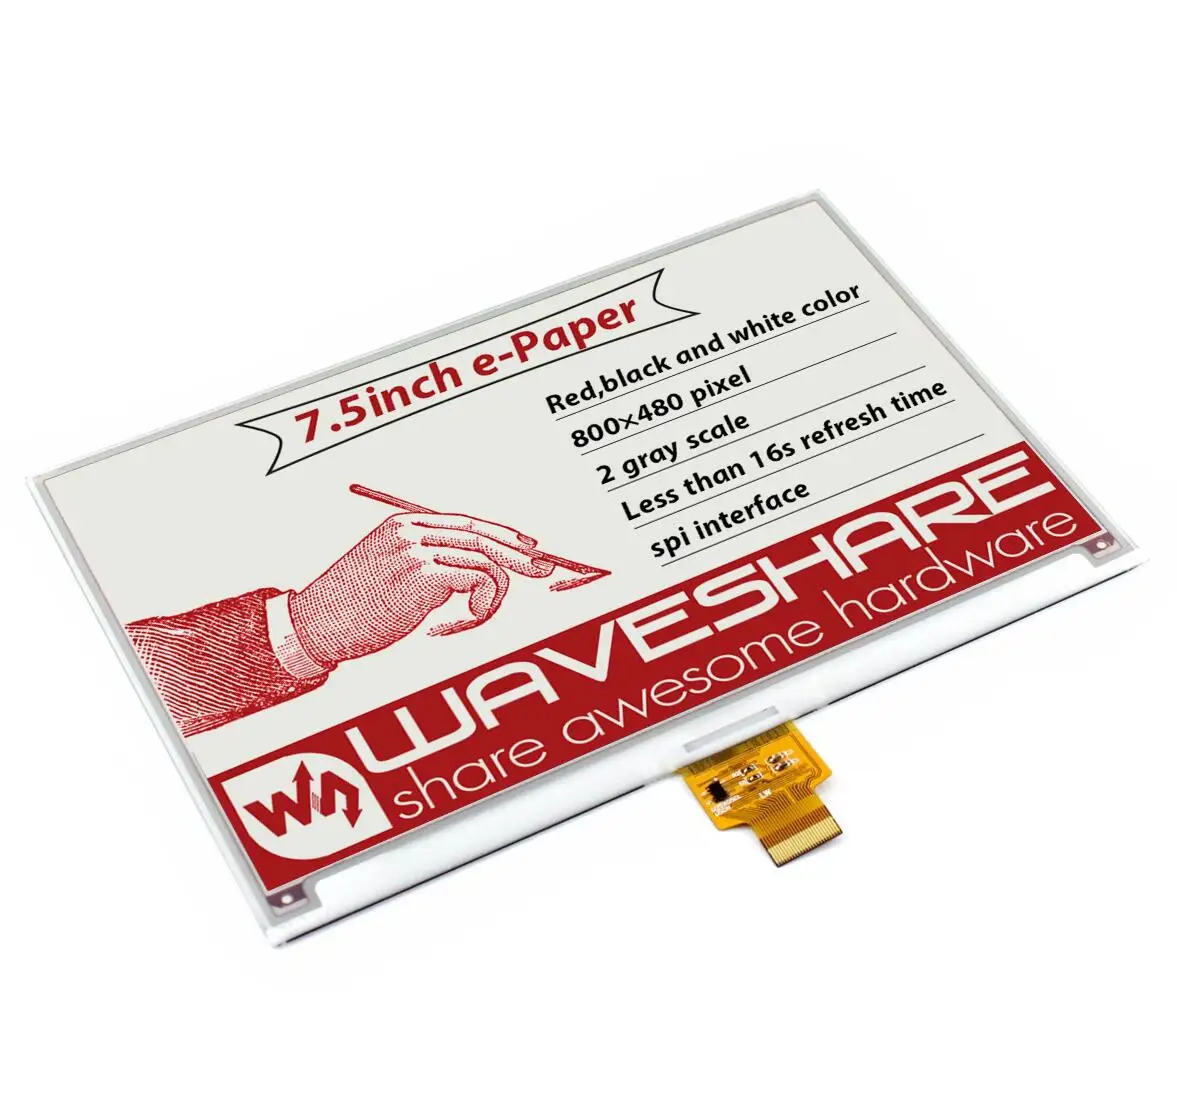 Waveshare 7.5inch E-Paper (B) E-Ink Raw Display 800*480 Red Black White SPI Without PCB